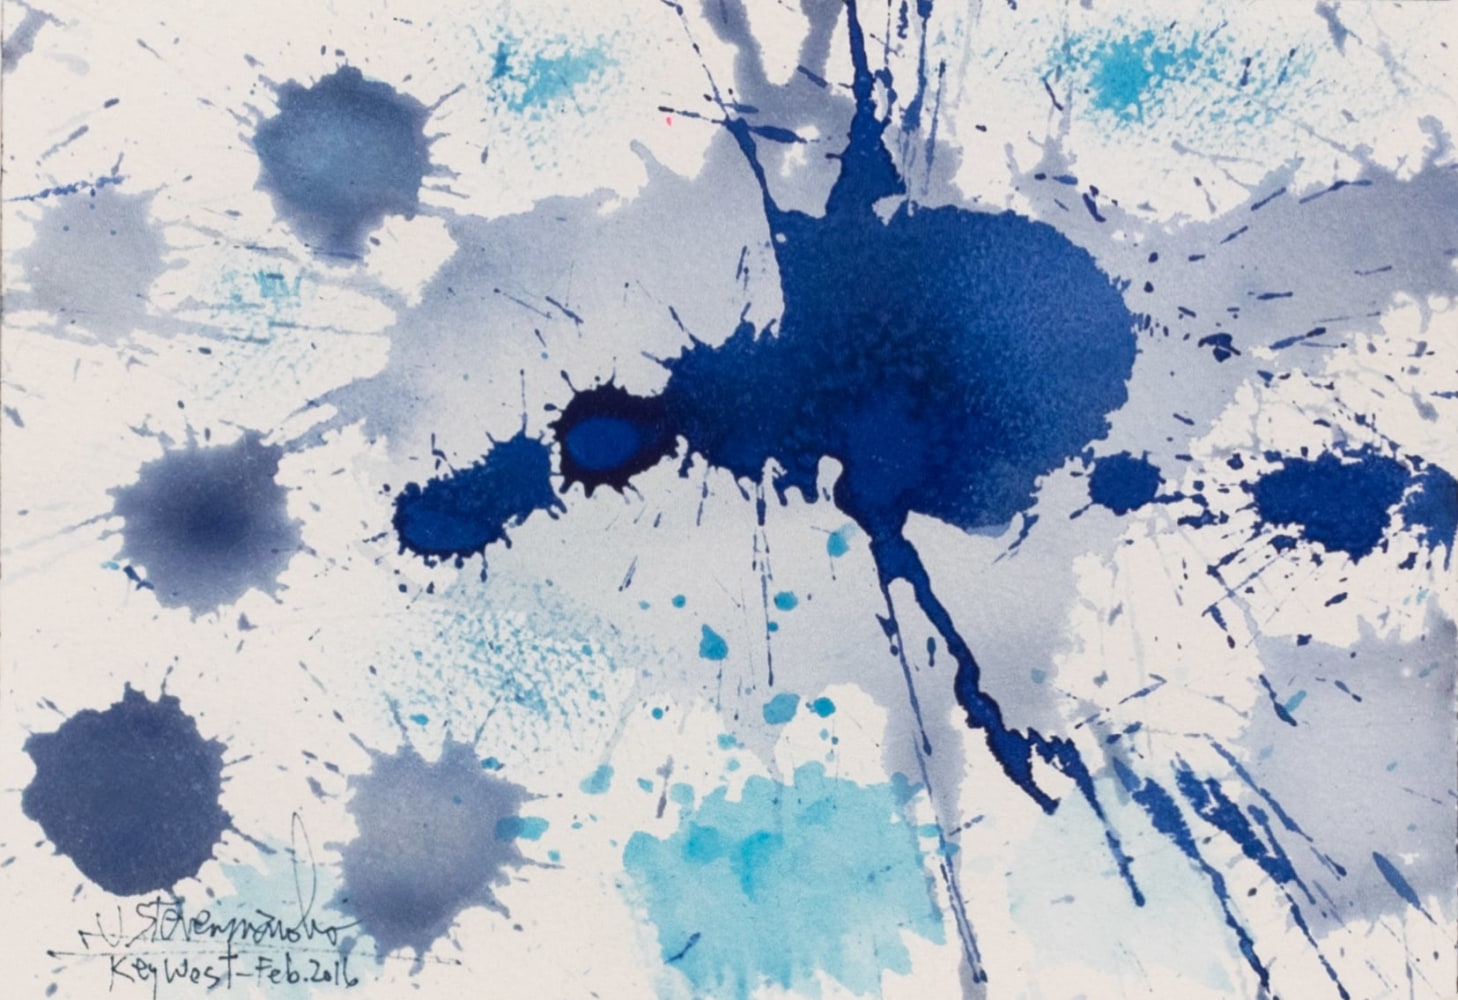 J. Steven Manolis, Splash (Key West) 07.10.05, 2016, Watercolor painting on Arches paper, 7 x 10 inches, Blue Abstract Art, Splash Art for sale at Manolis Projects Art Gallery, Miami, Fl